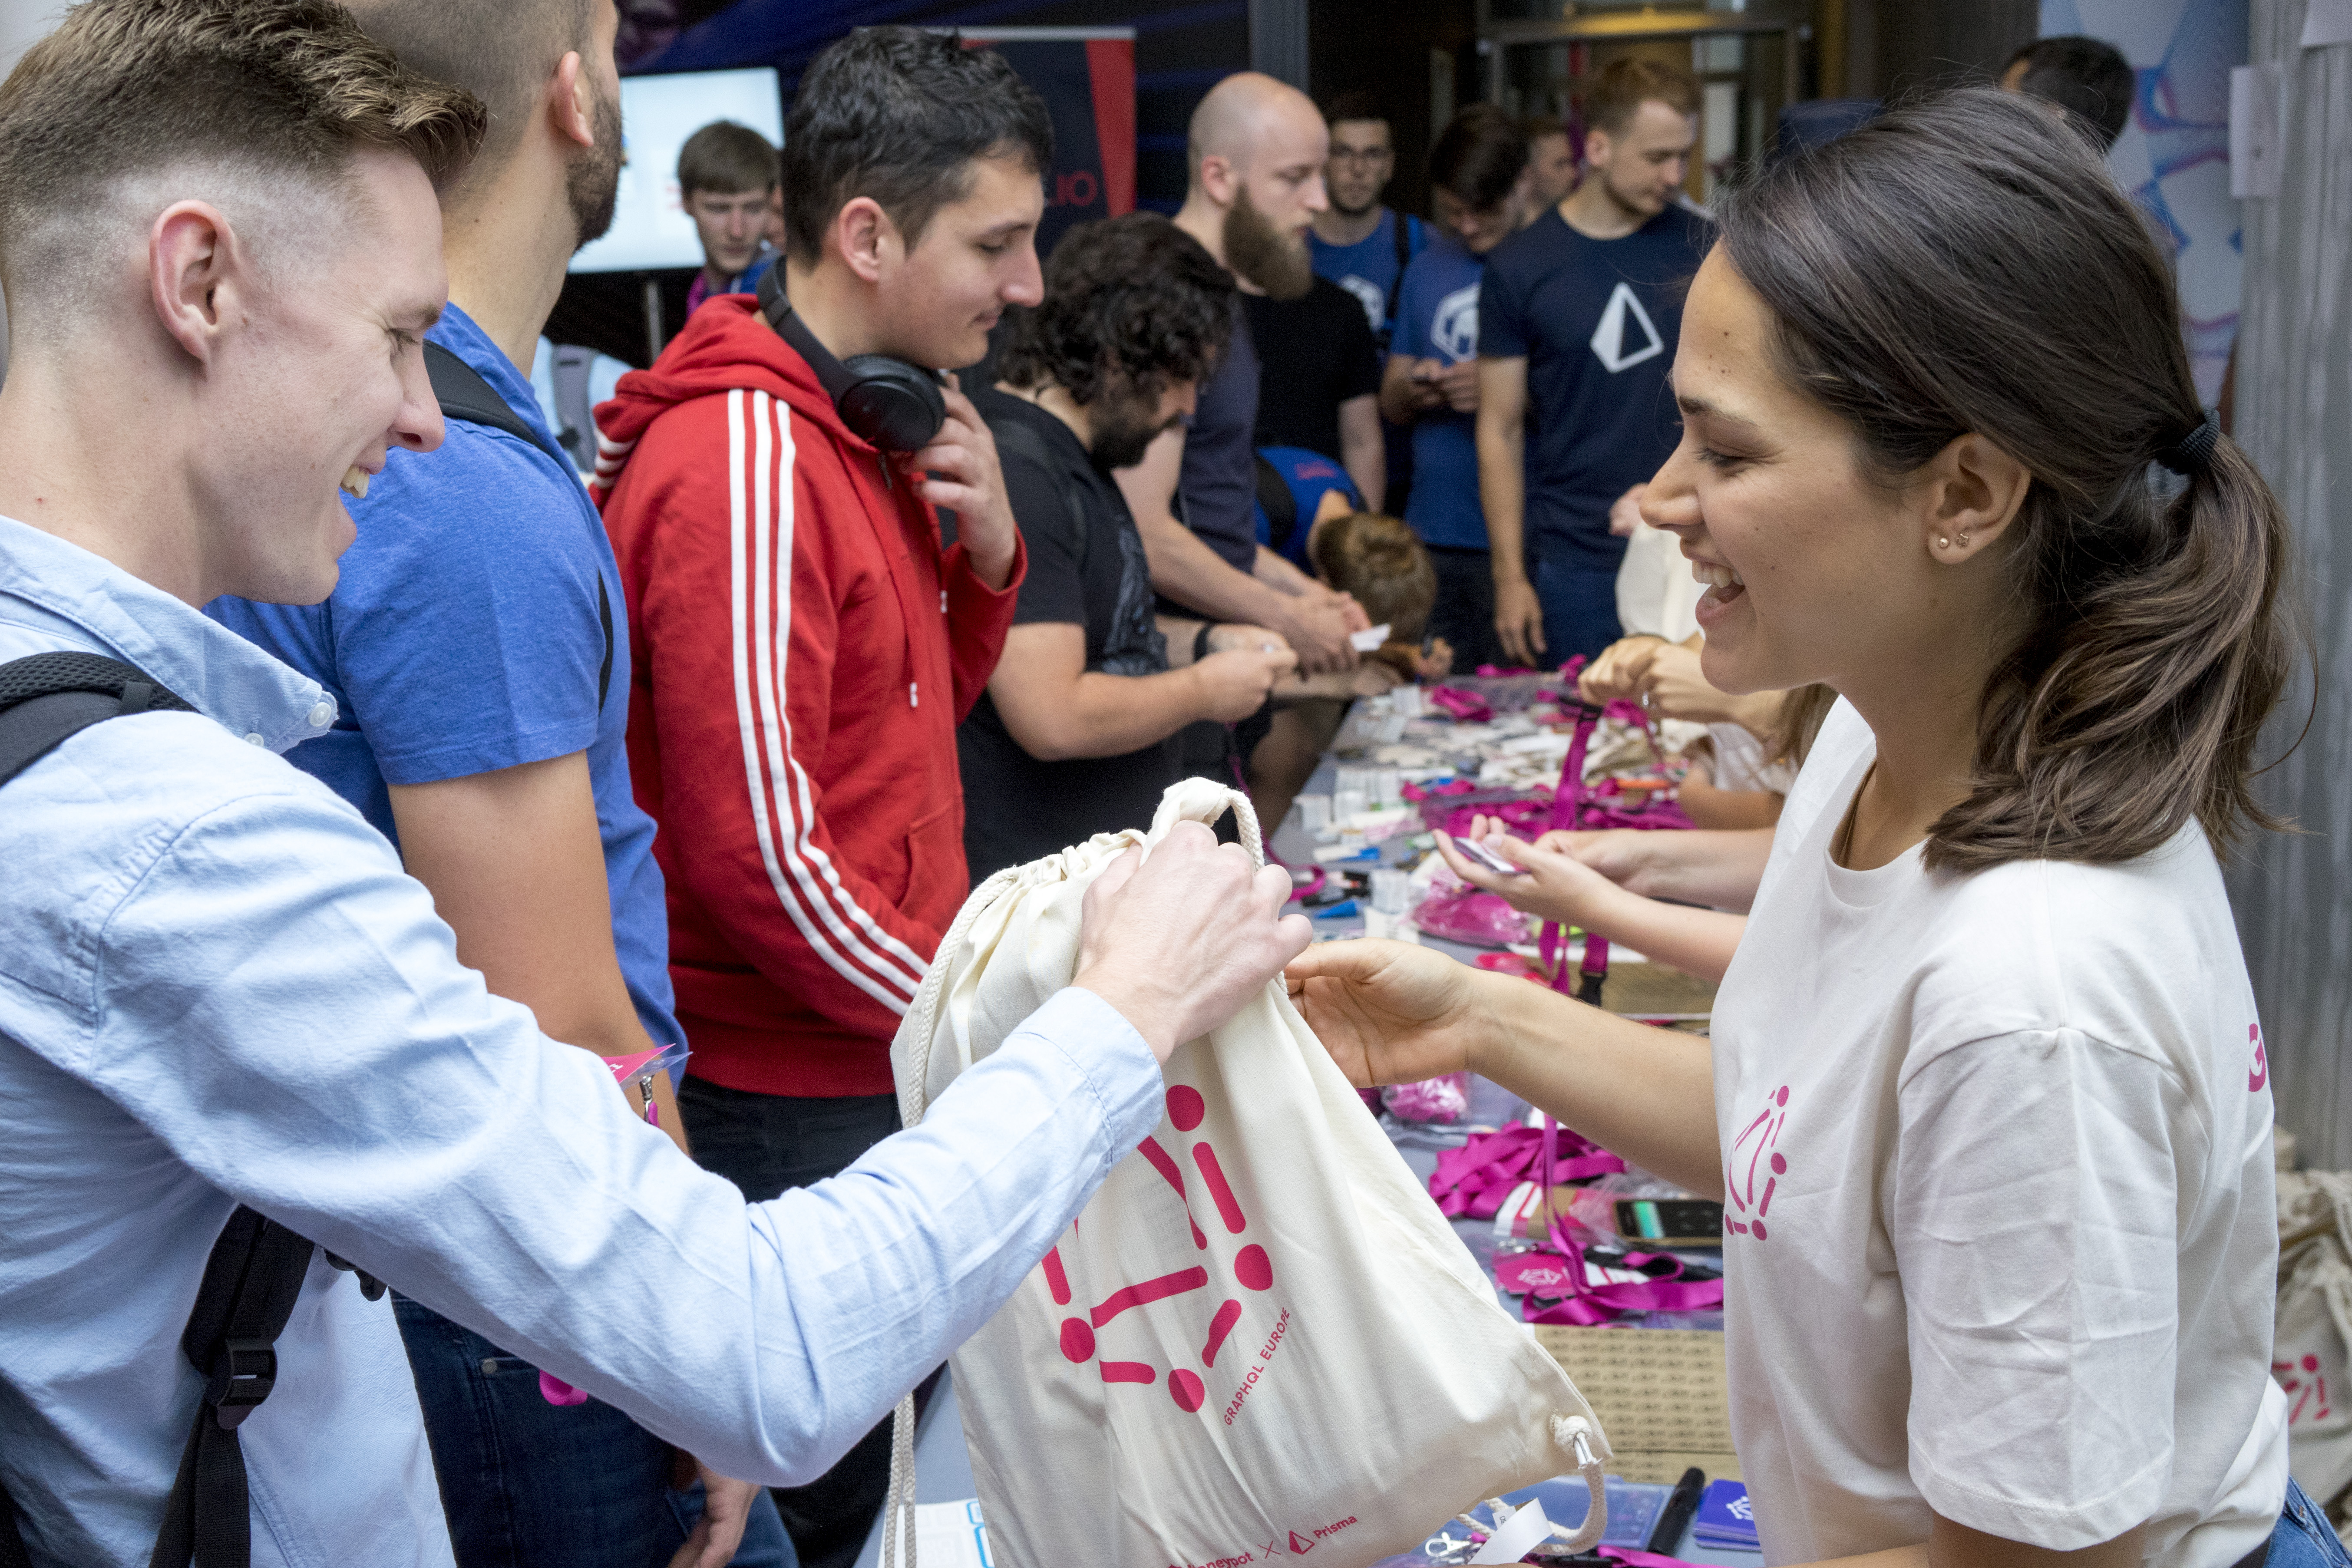 Debbie, our Head of Talent Management, handing out our swag bags at GraphQL Conf 2018.